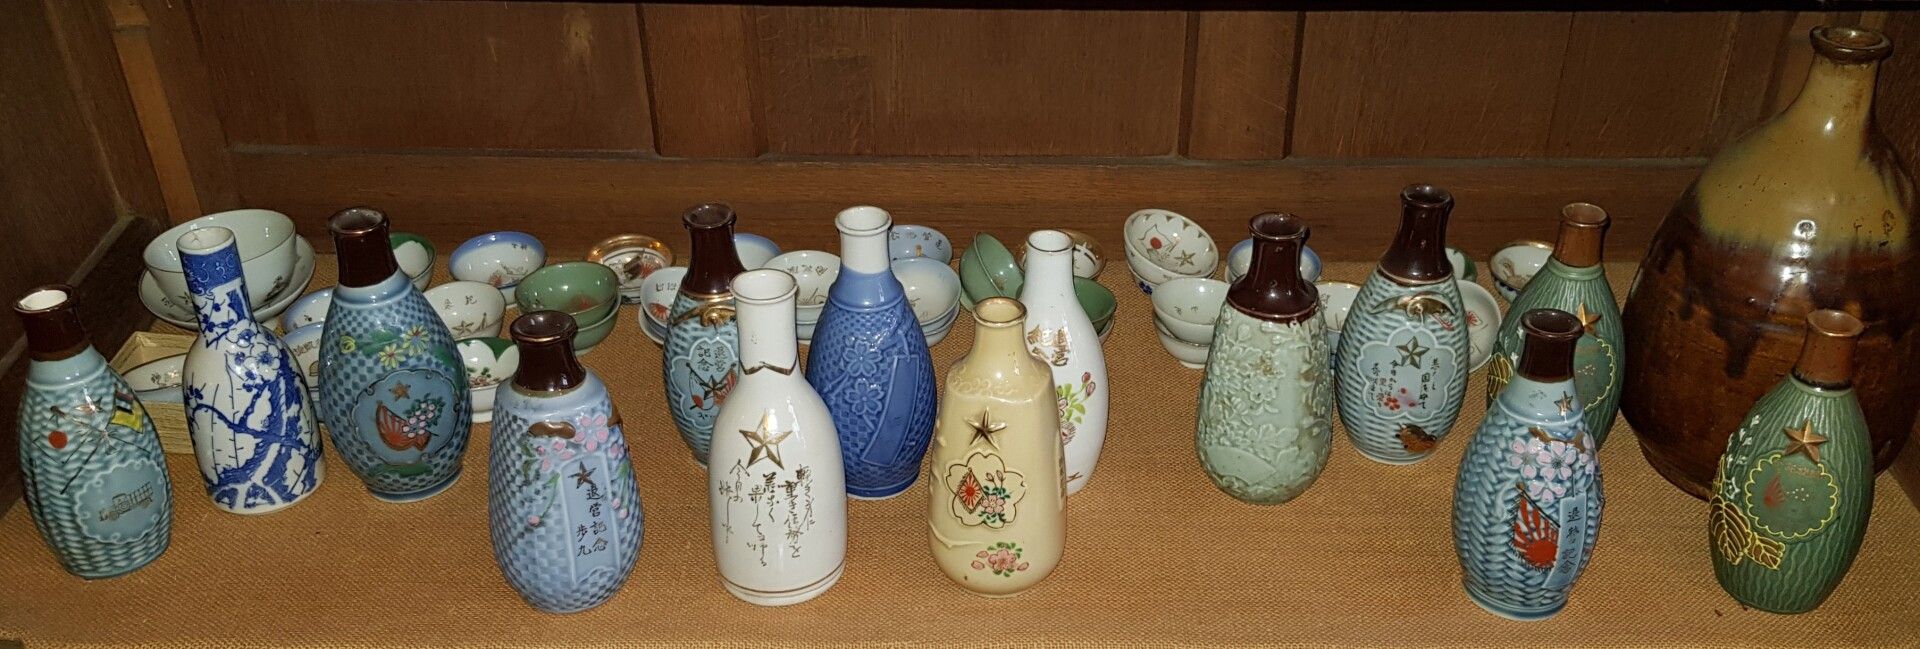 Null A lot of sake bottles and glasses, in porcelain or stoneware.



We join th&hellip;